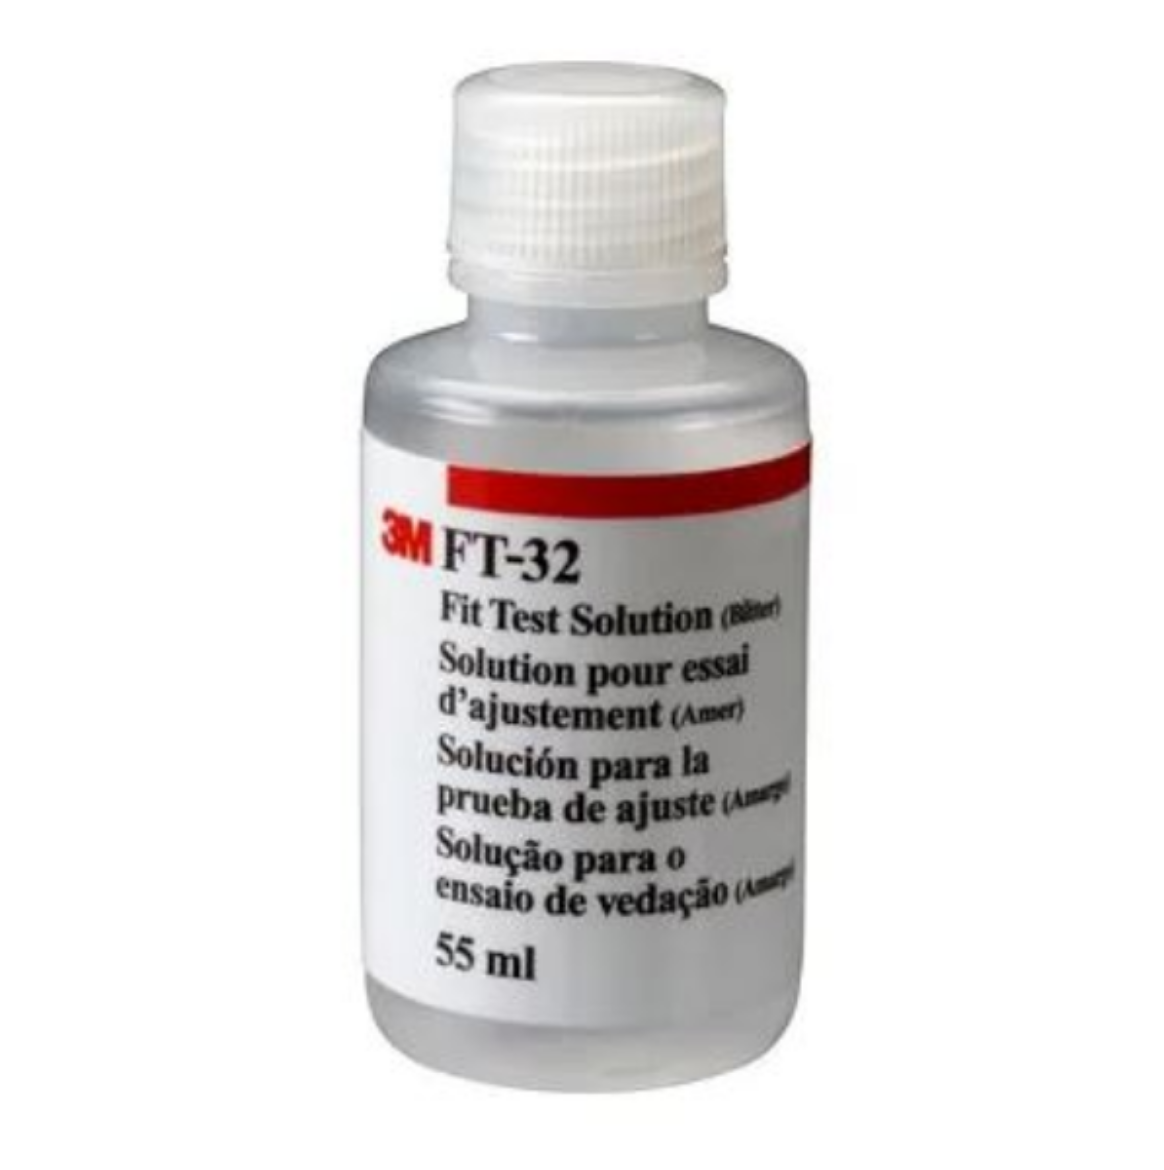 Picture of FT-32 FIT TEST SOLUTION BITTER (BITREX), 55ML